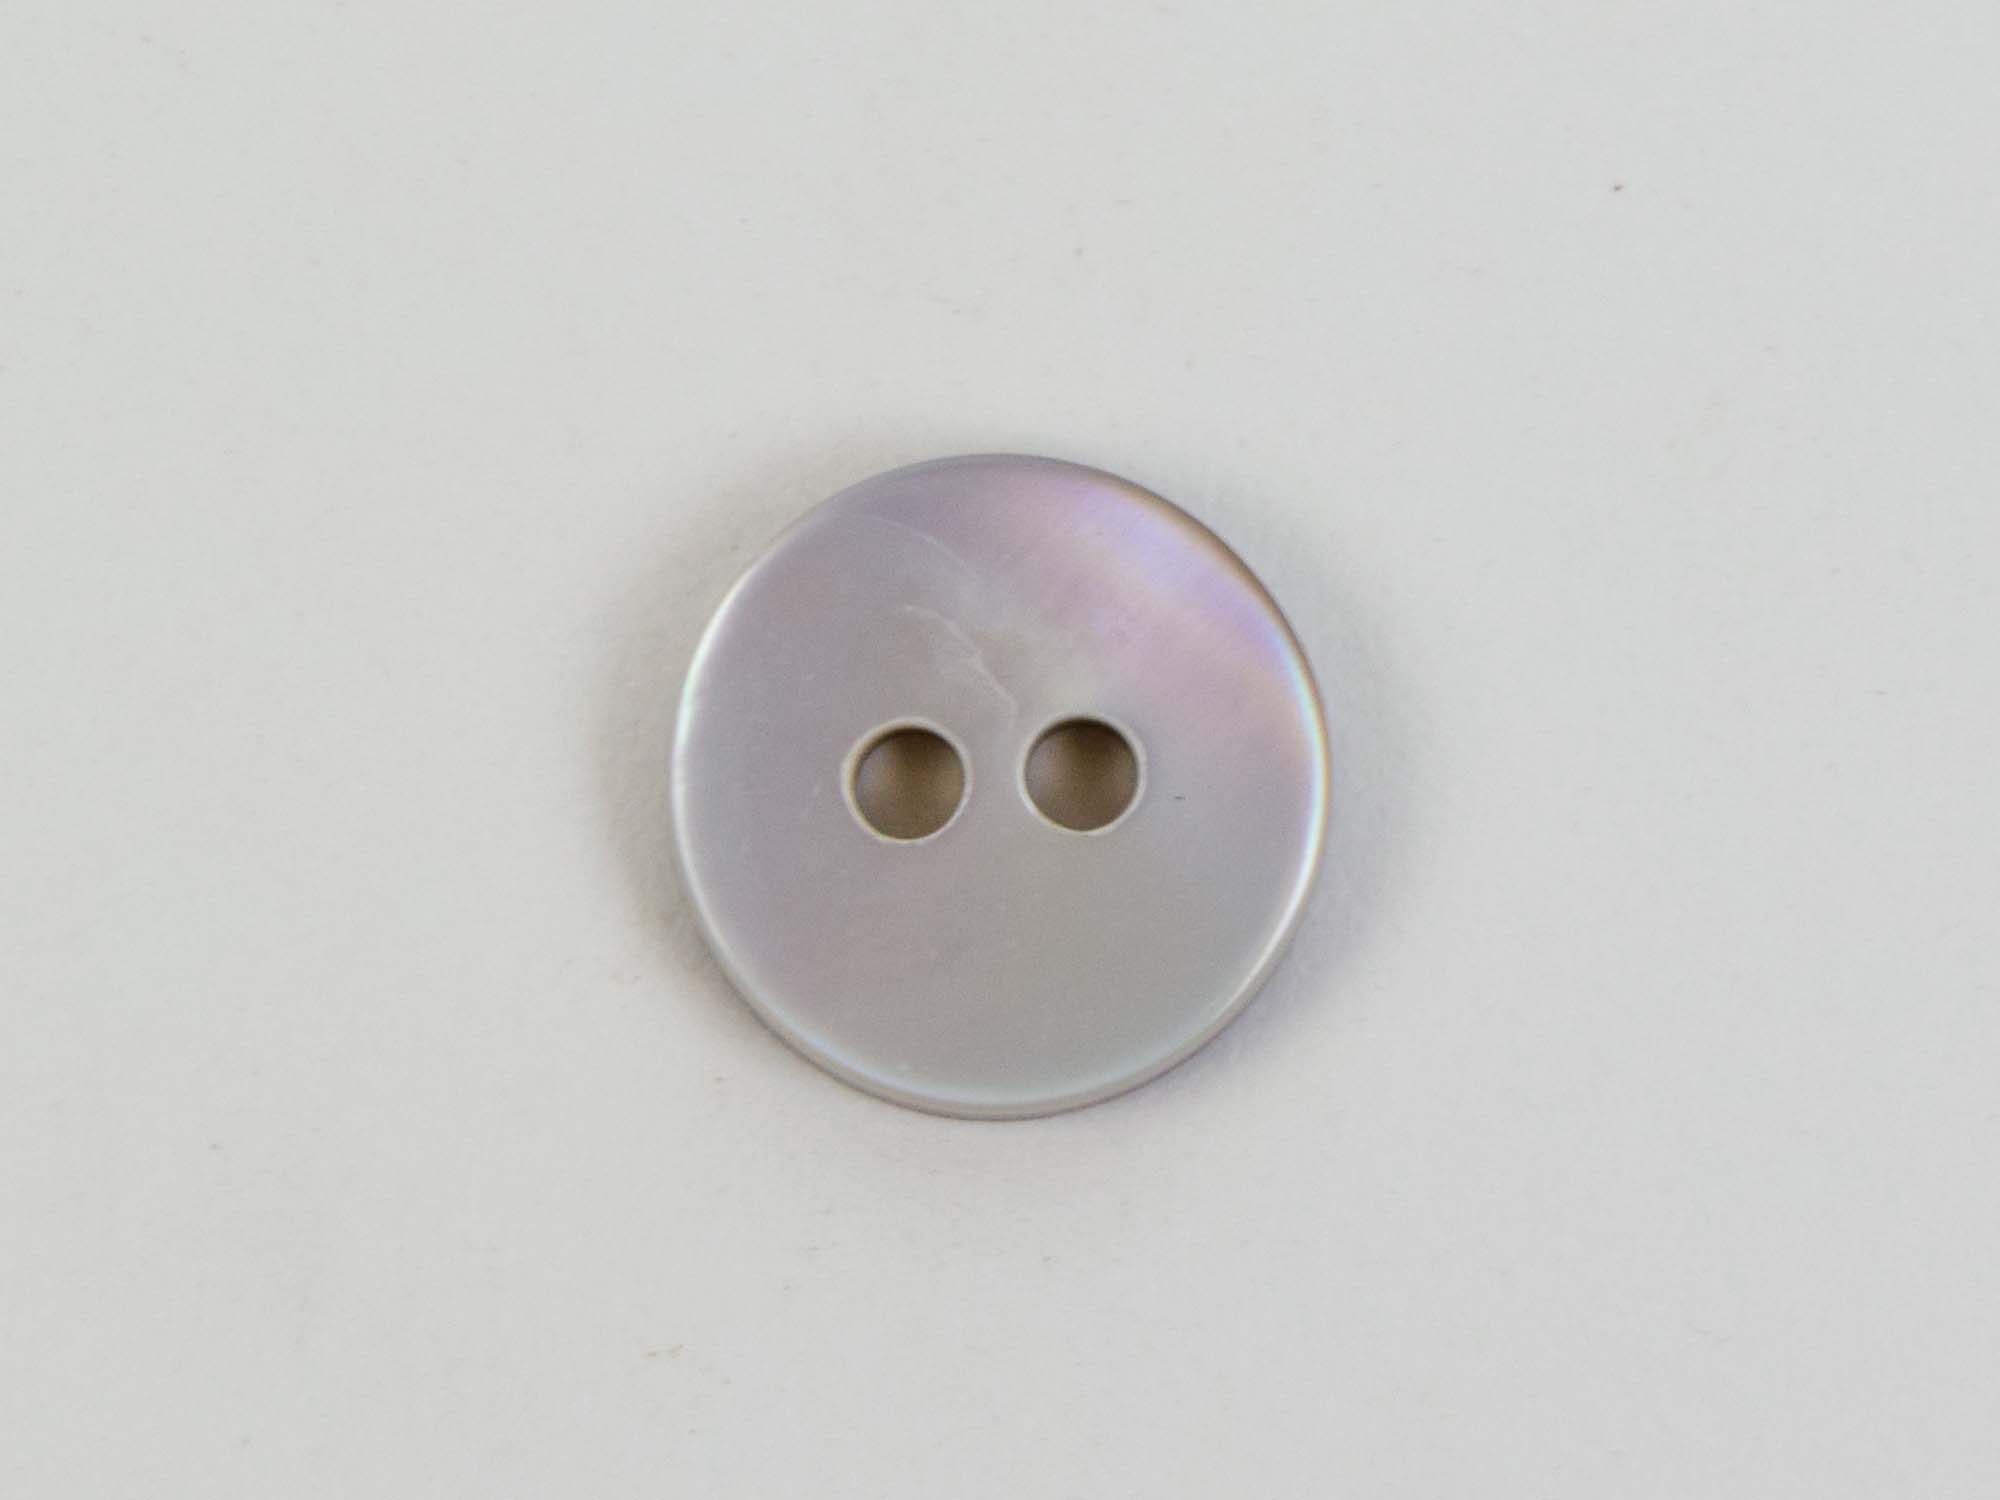 Brown Mother Of Pearl Button: 16L (10.5mm or 0.413") 